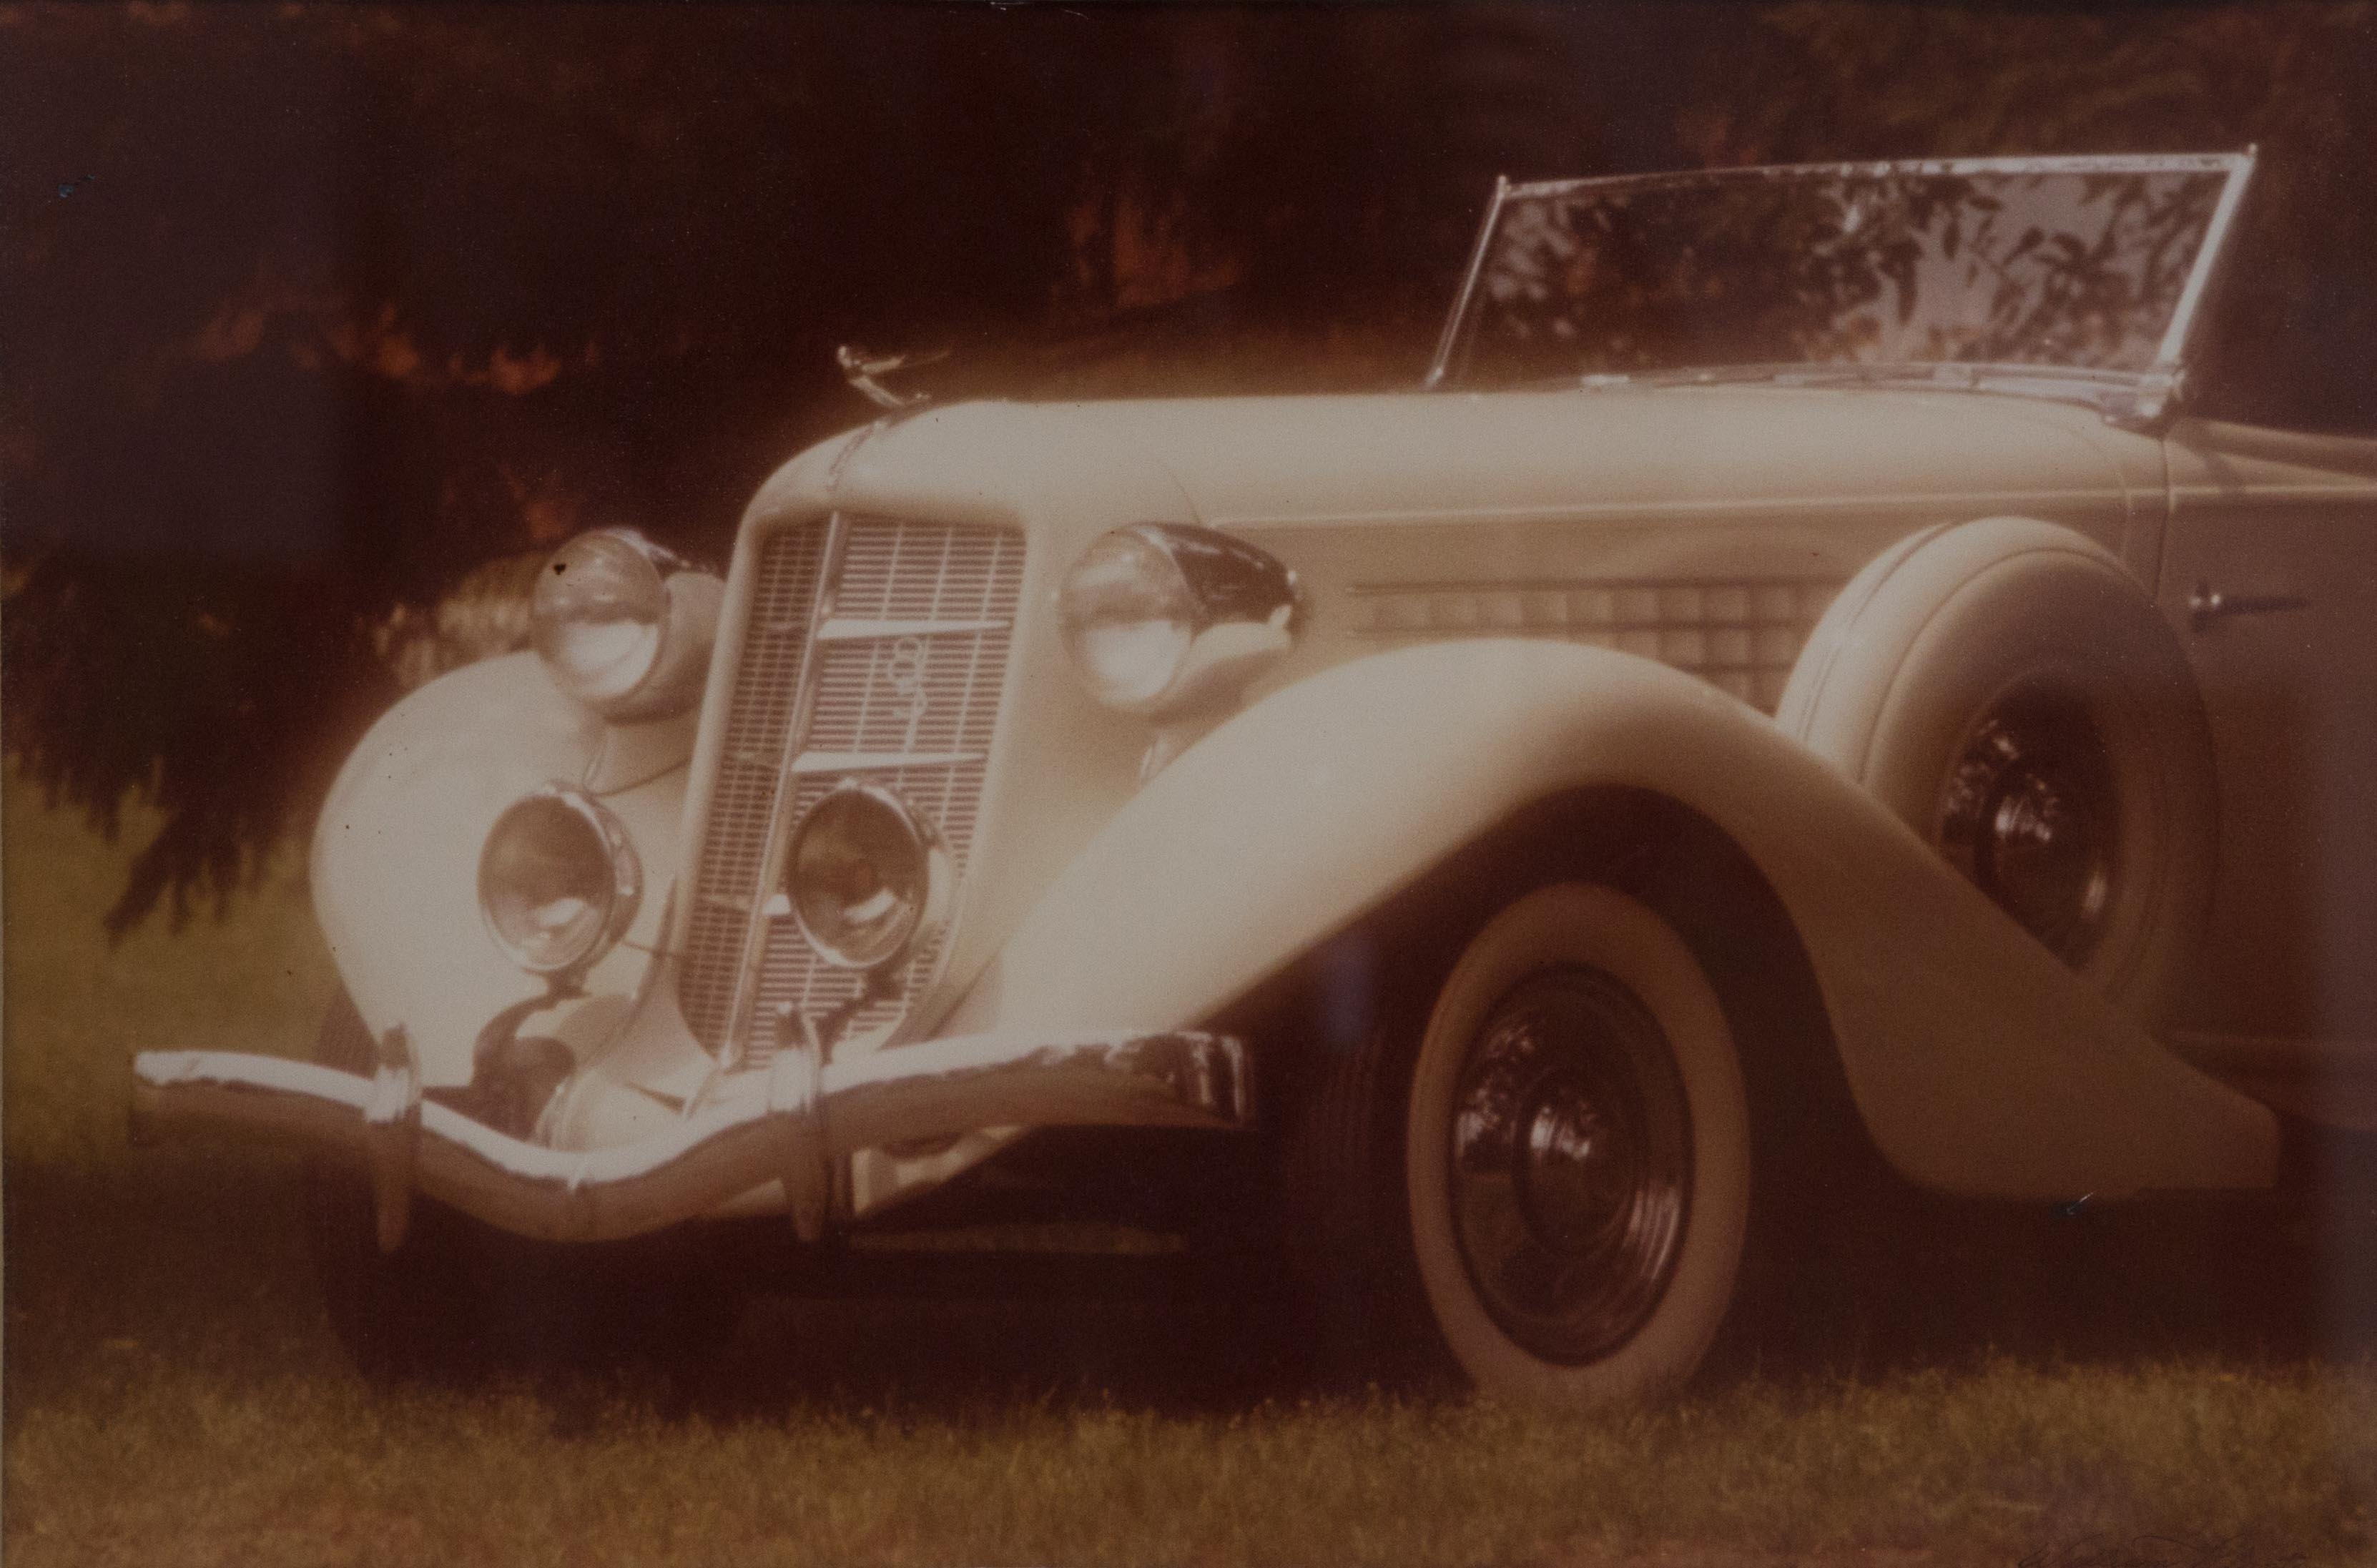 Offered is a signed William Plante original signature large folio vintage sepia toned silver print of a 1935 Auburn automobile. This speedster design by engineer Gordon Buehrig, was launched in Auburn’s final year. The work measures 24” x 32” and